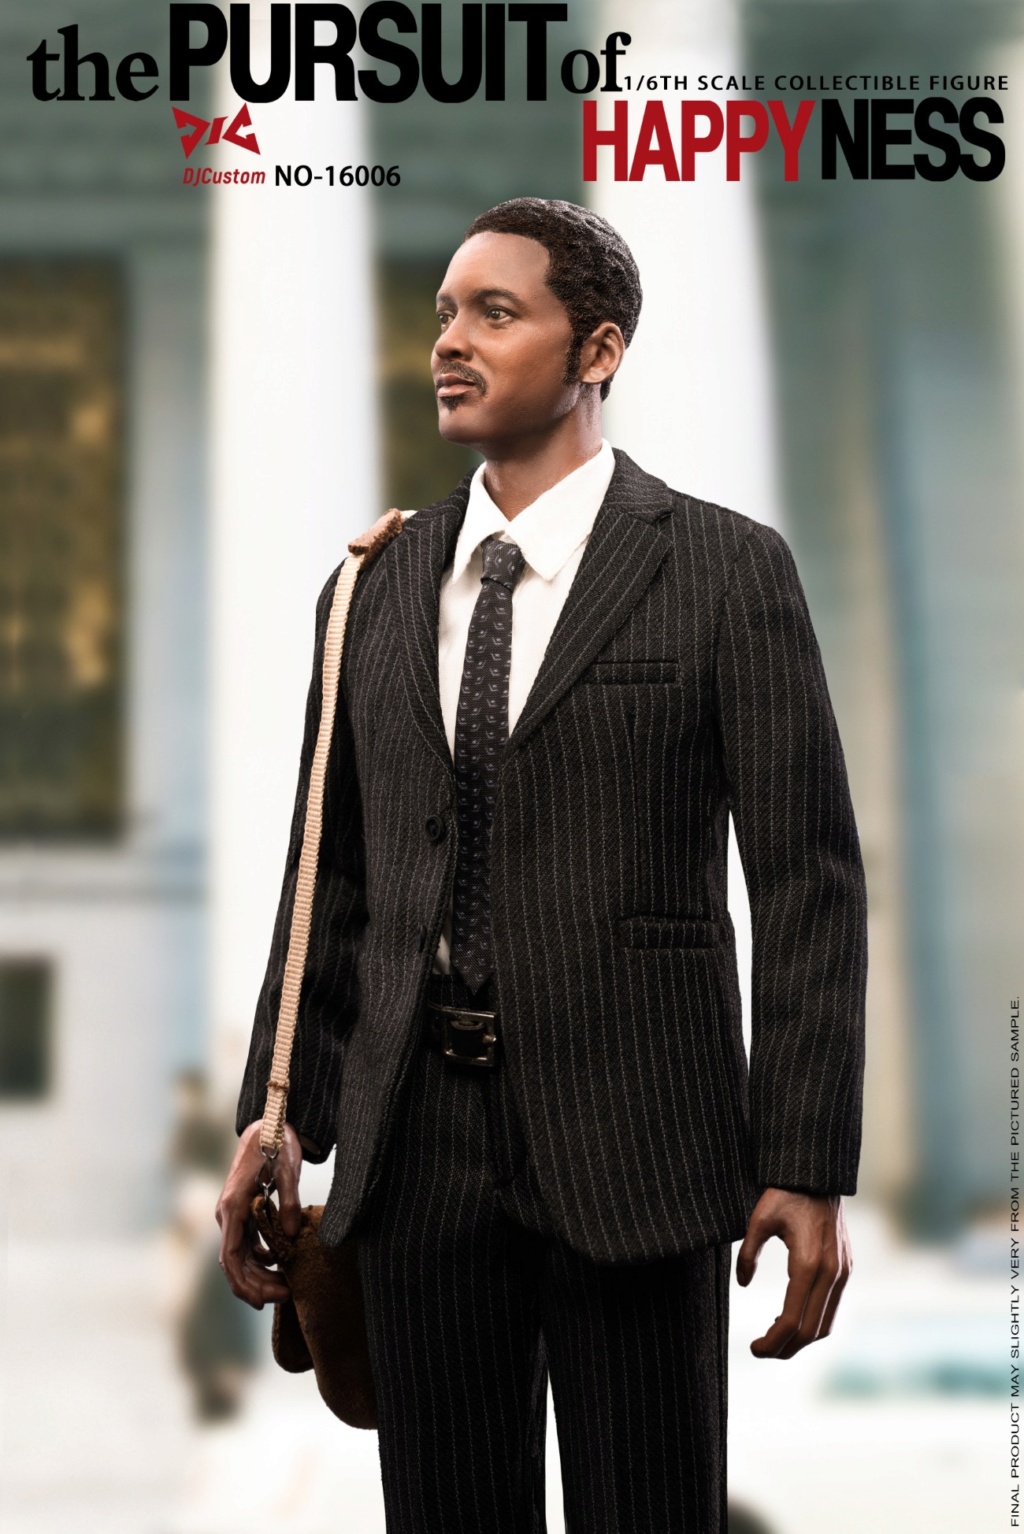 drama - NEW PRODUCT: DJ-CUSTOM: 1/6 "Pursuit of Happyness" Collectible Doll Set 12210010